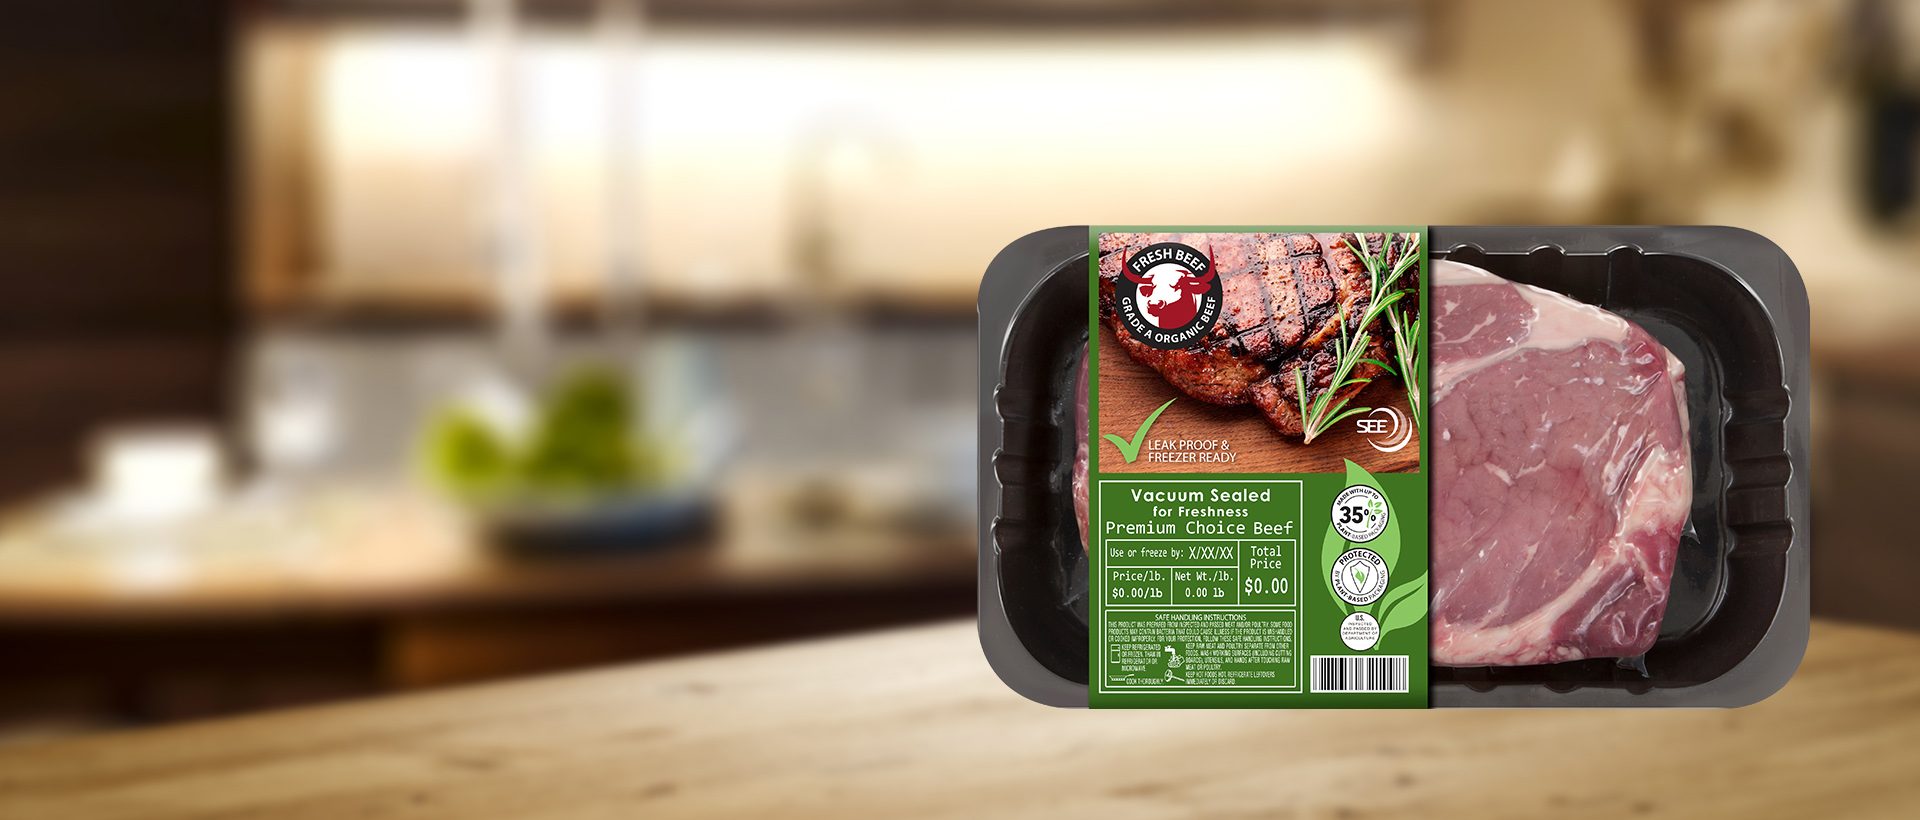 meat packaged in case-ready packaging